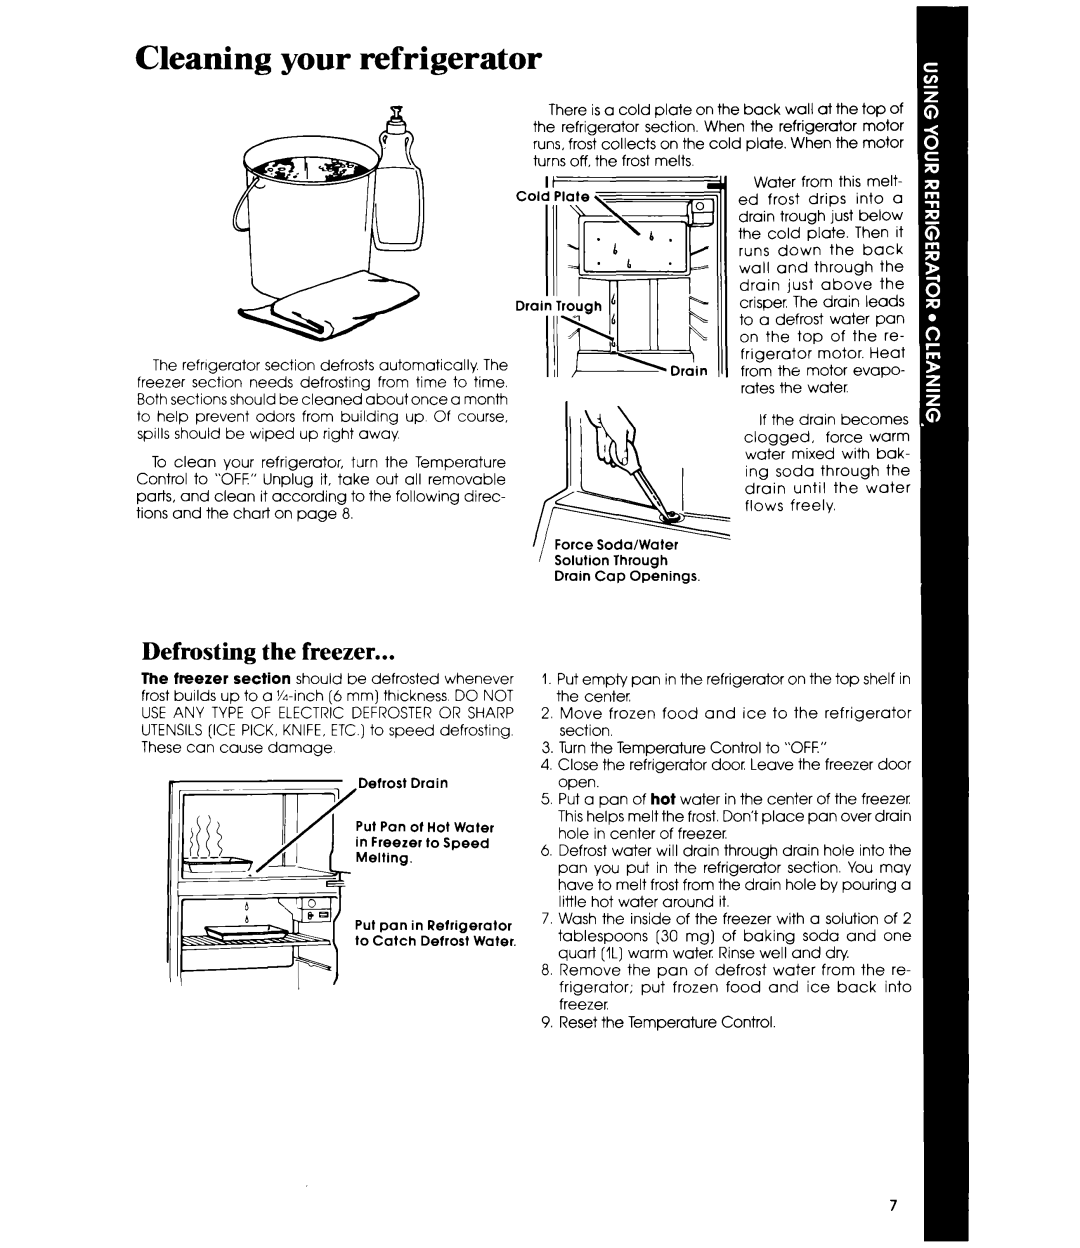 Whirlpool ETl2EC manual Cleaning your refrigerator, Defrosting the freezer 